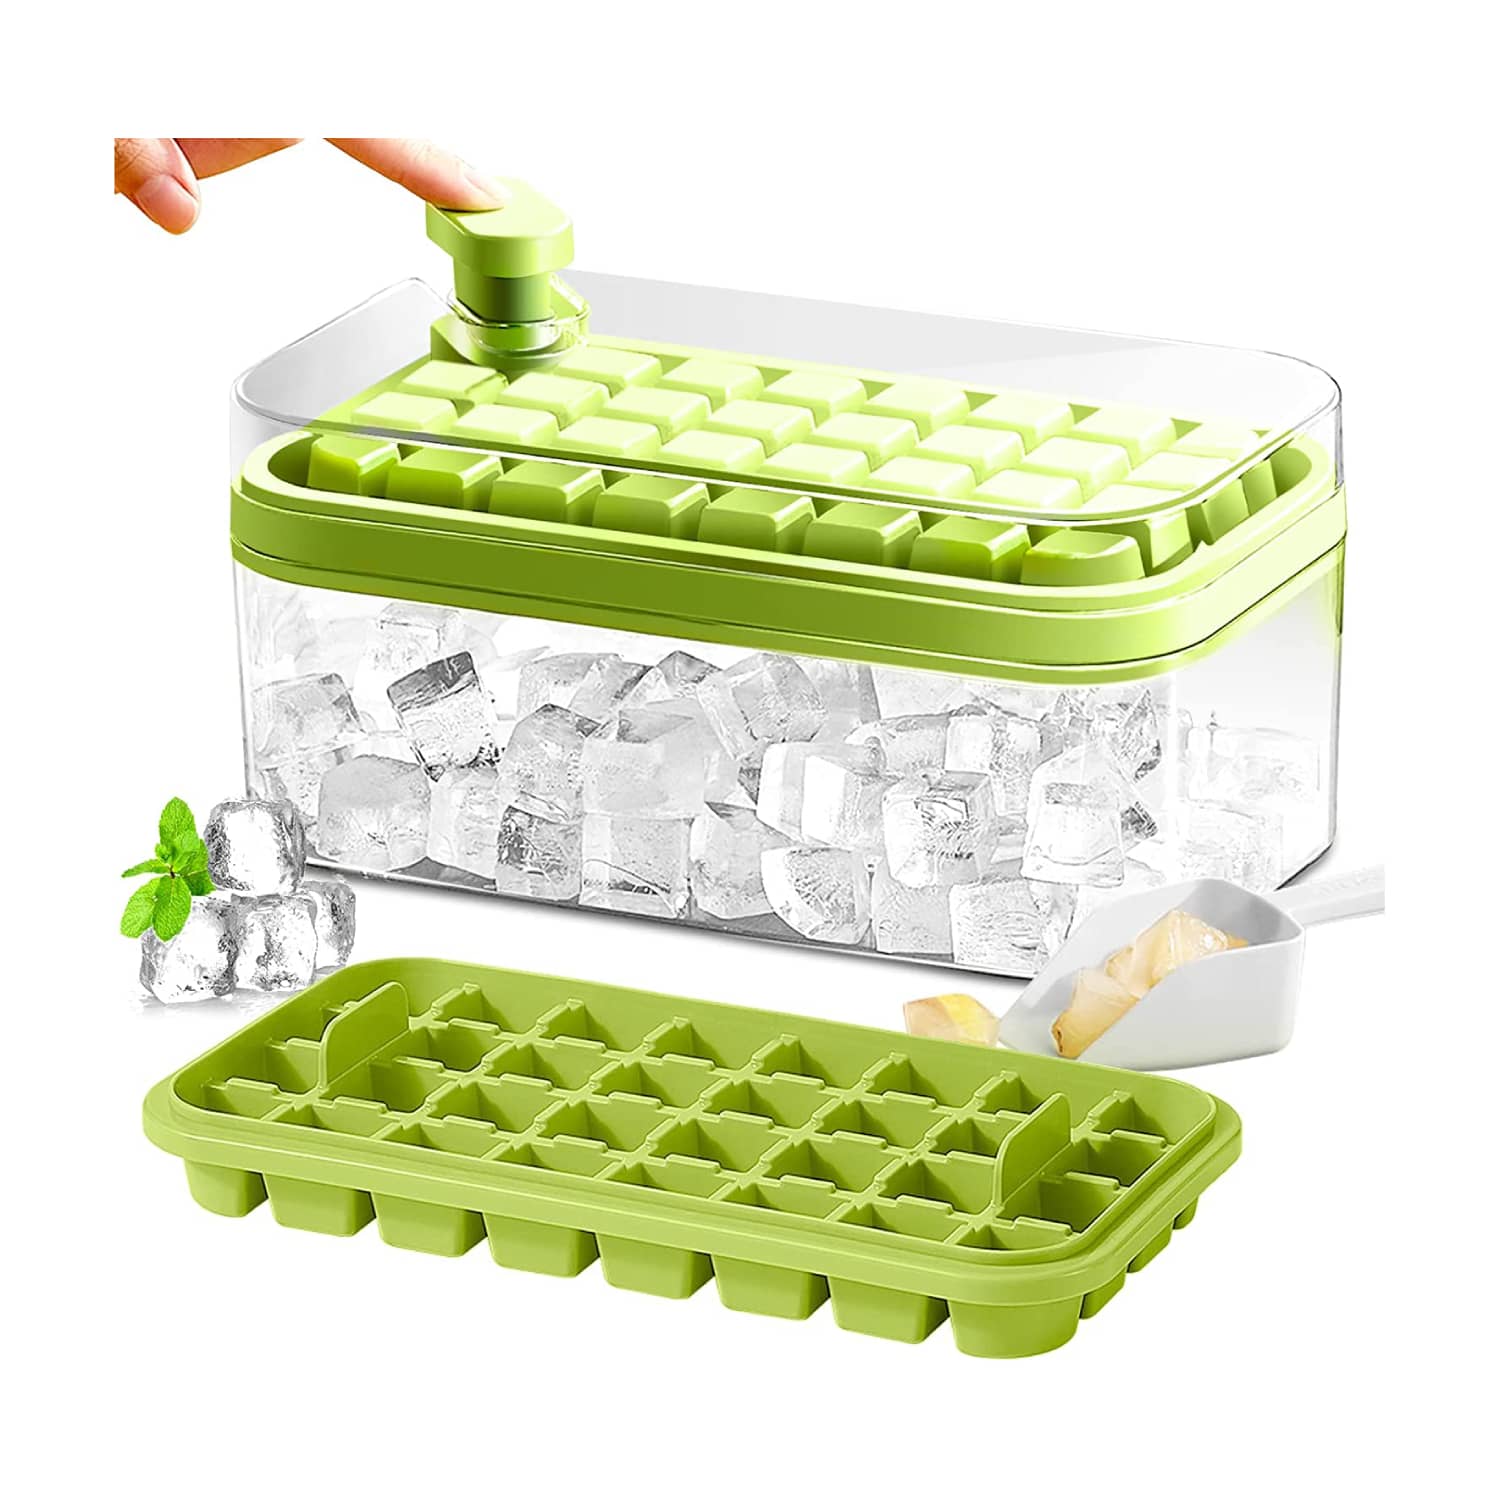 https://cdn.apartmenttherapy.info/image/upload/v1691100715/at/shopping/ice-cube-tray.jpg